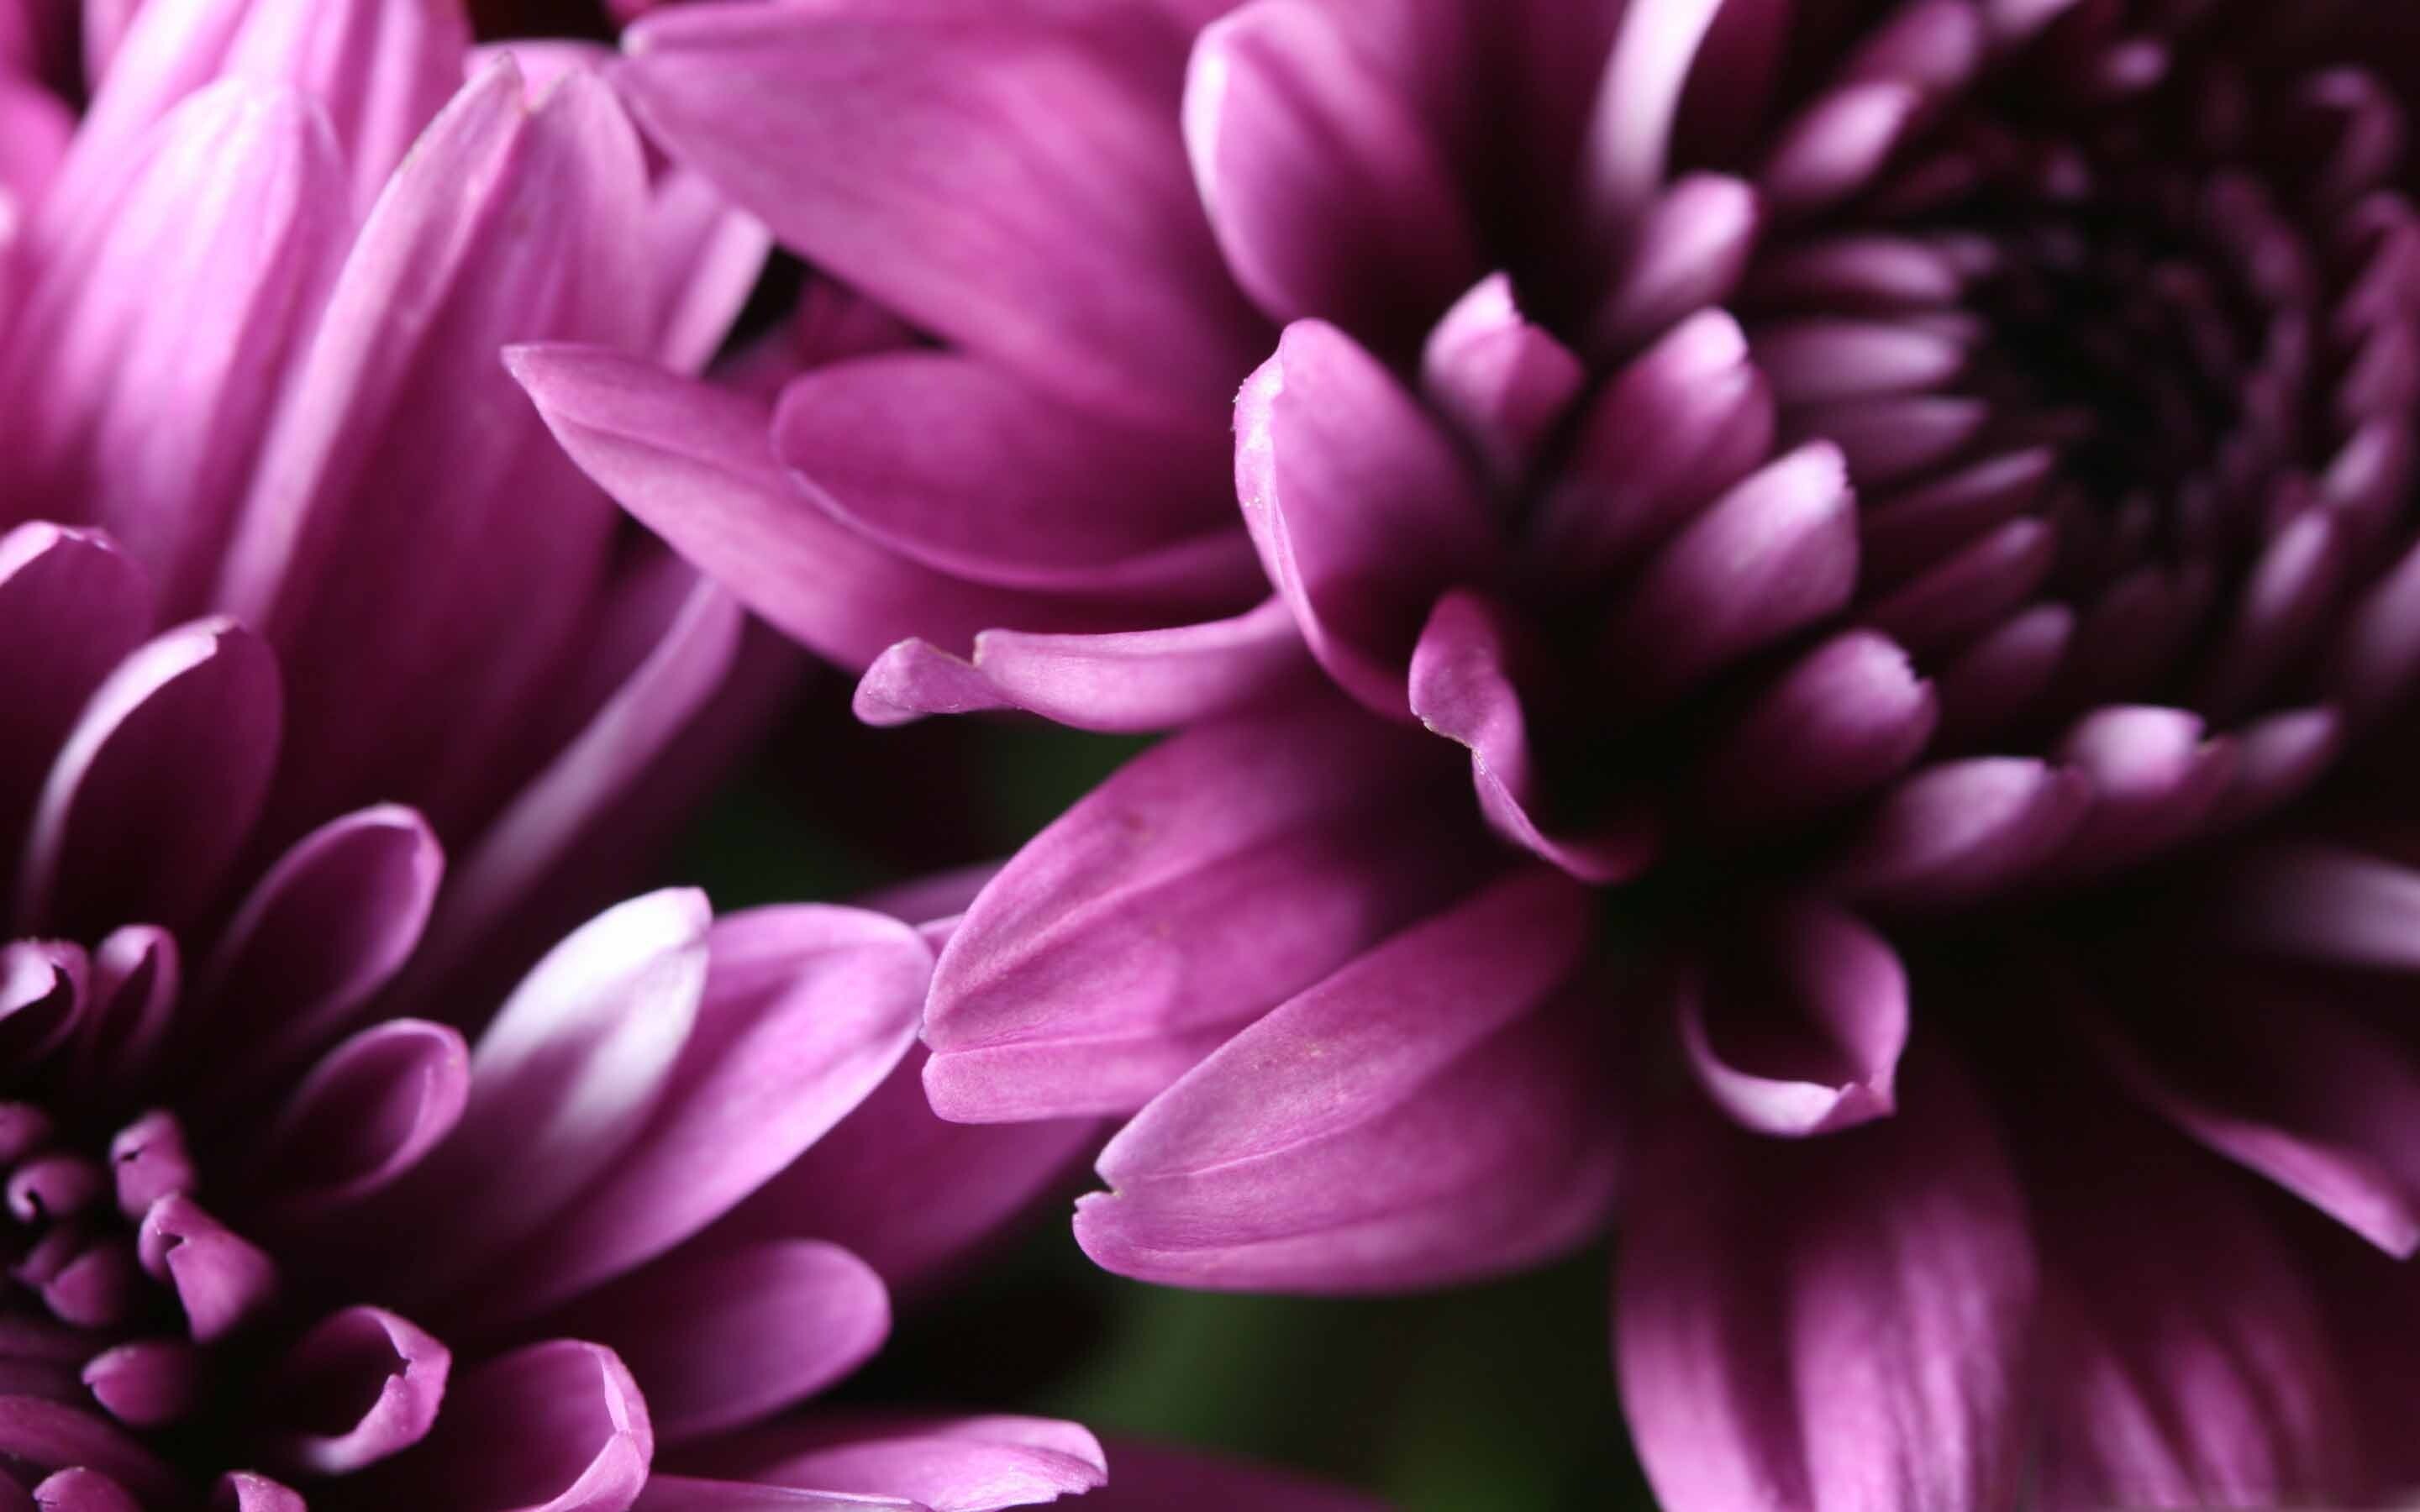 Chrysanthemum: The disc florets are yellow, Flowering plant. 2880x1800 HD Wallpaper.